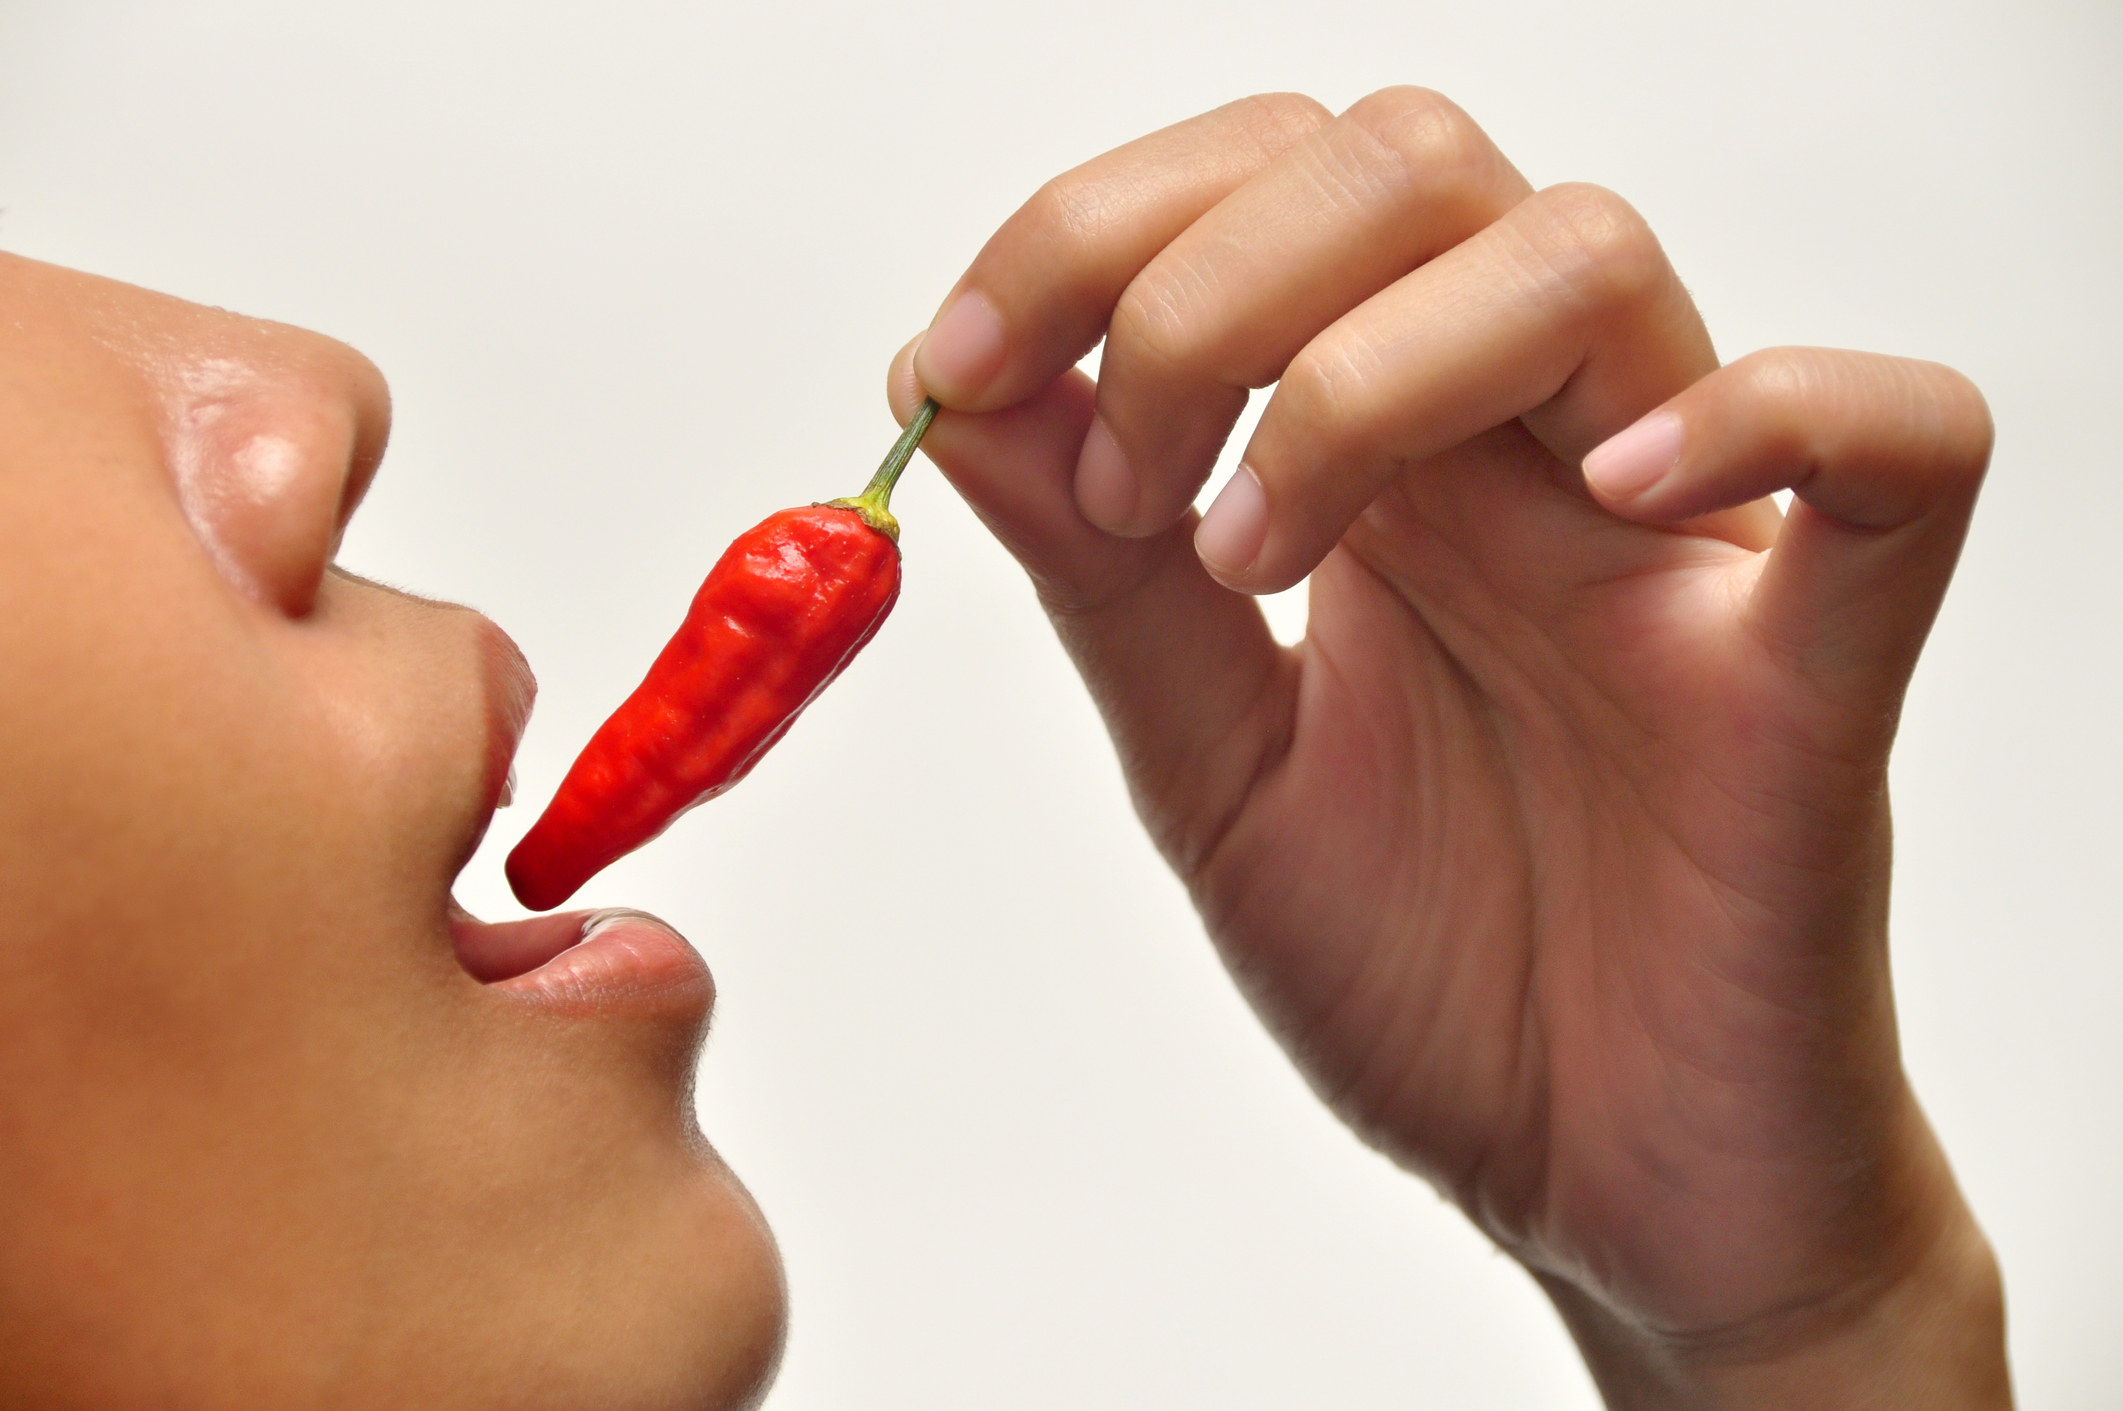 A person putting a spicy hot pepper in their mouth